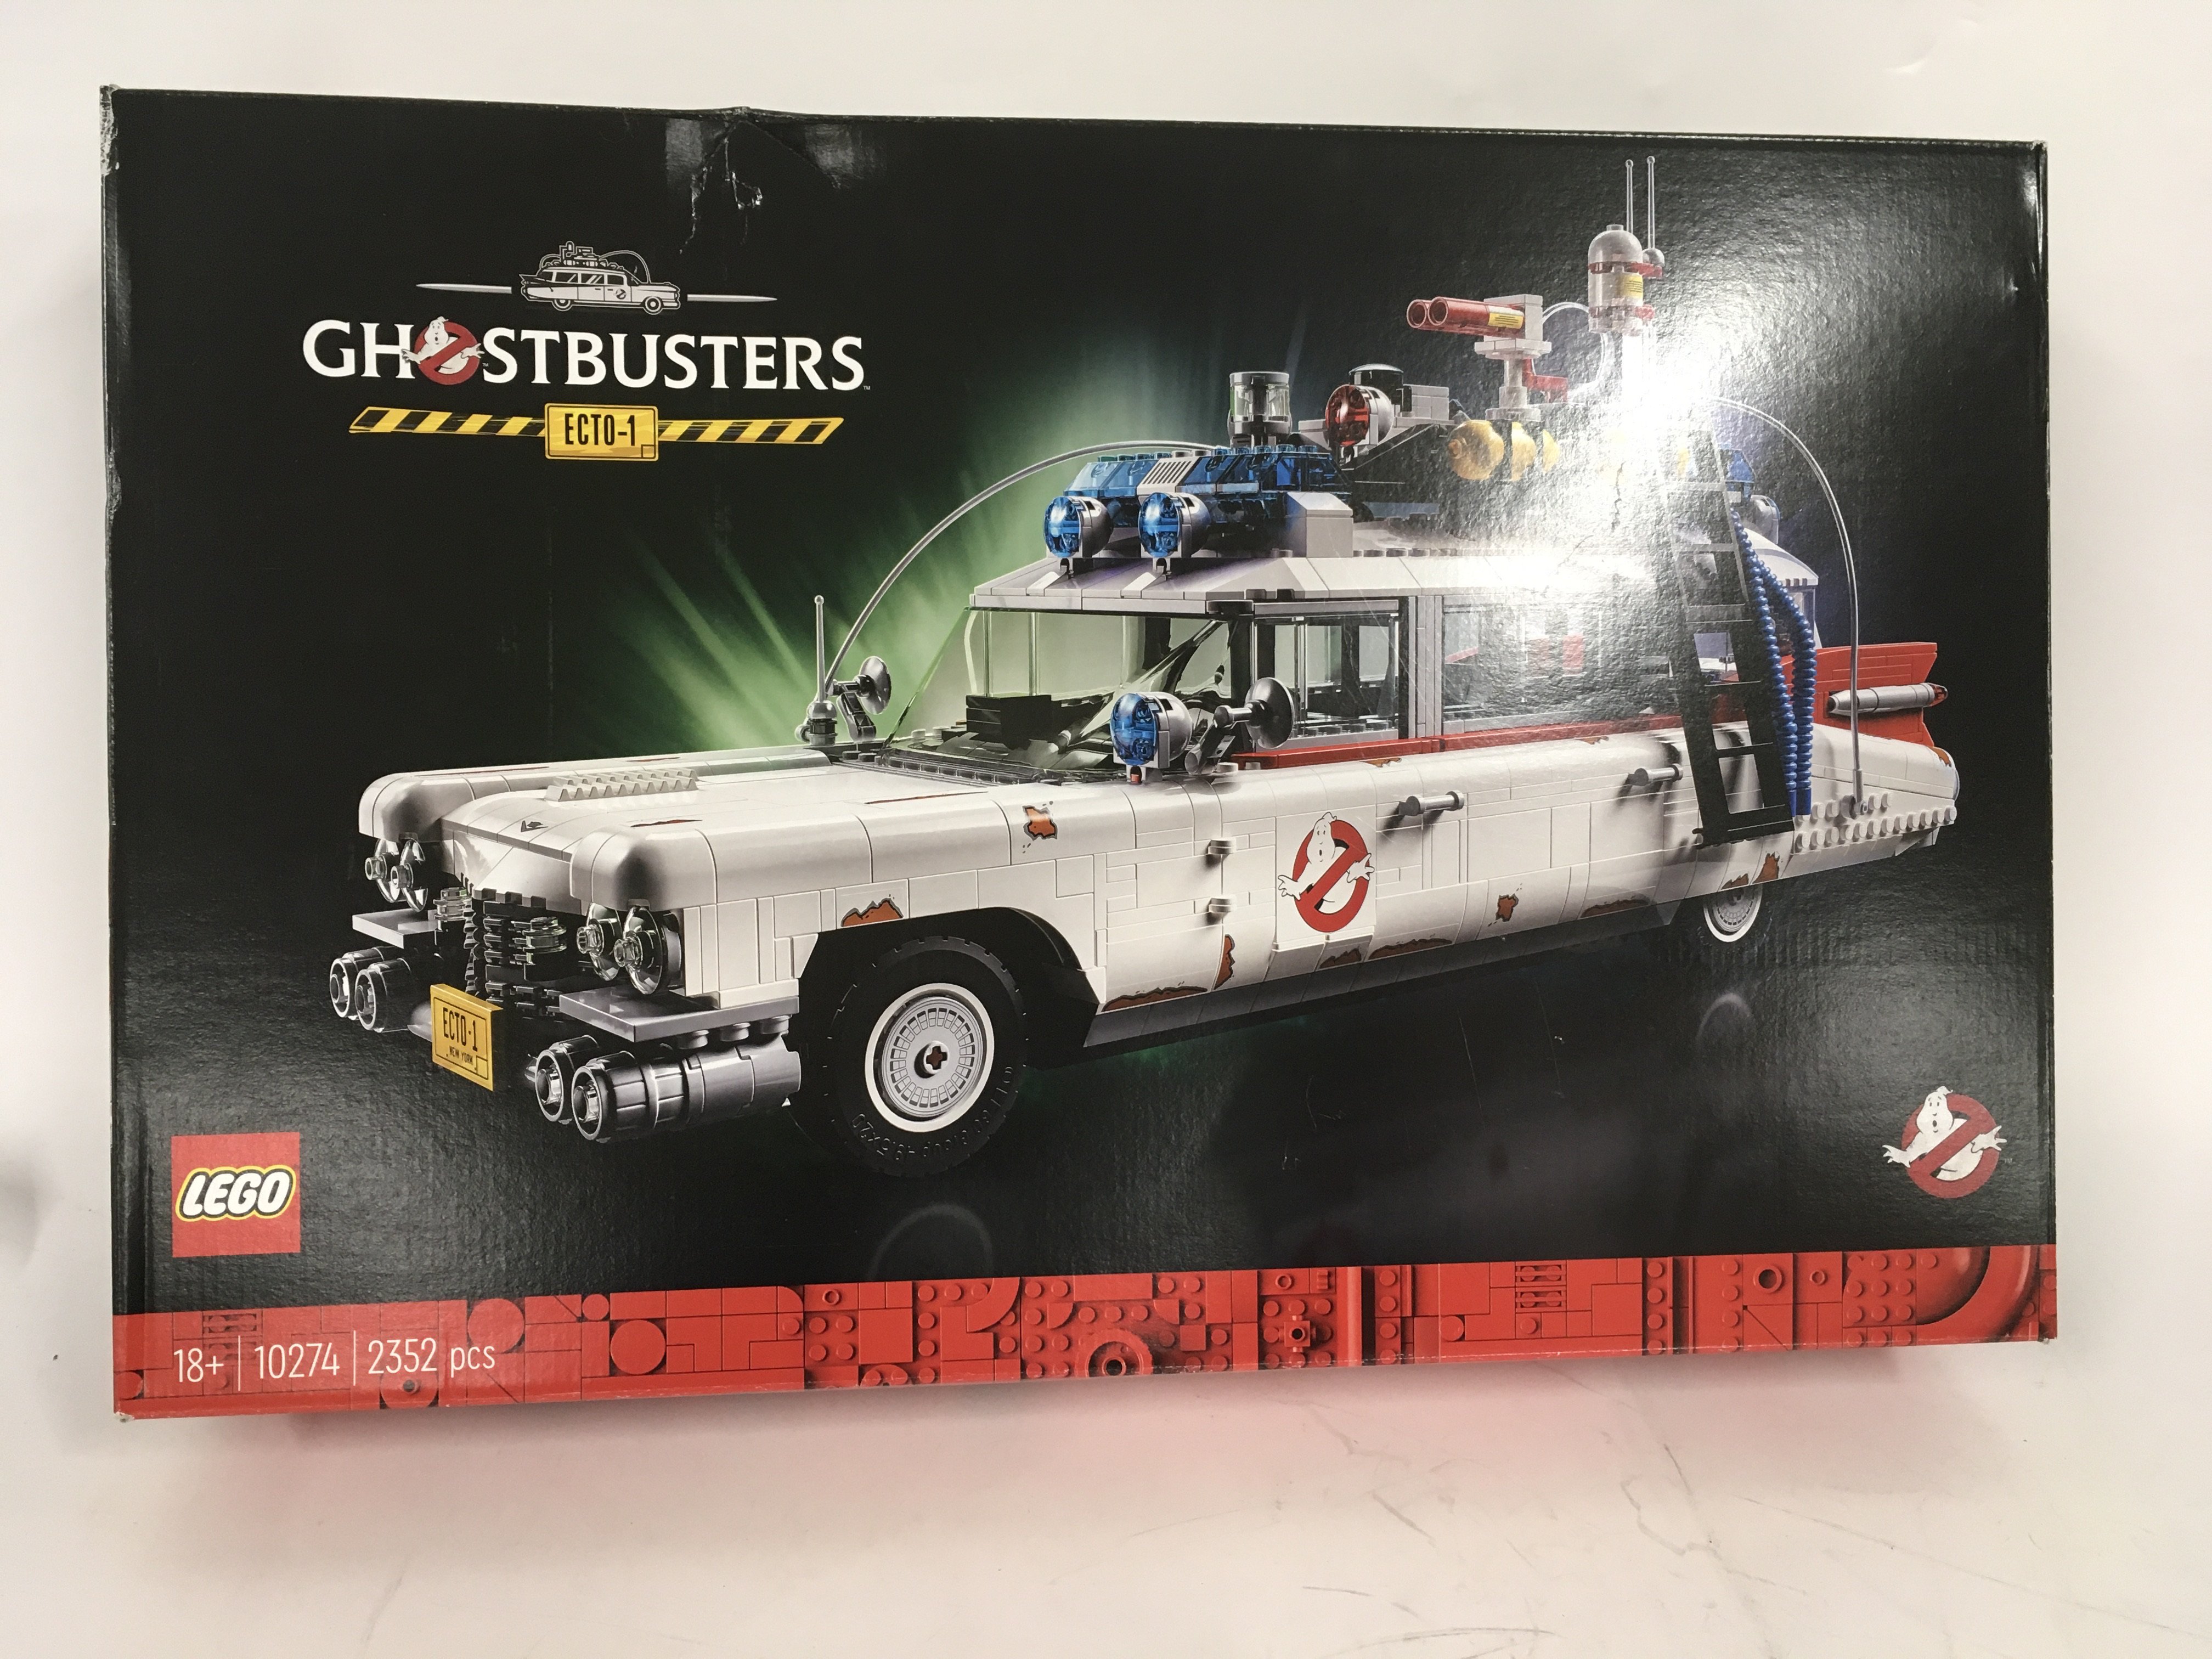 Sealed and unopened Lego set. Ghostbusters 10274 ECTO 1.